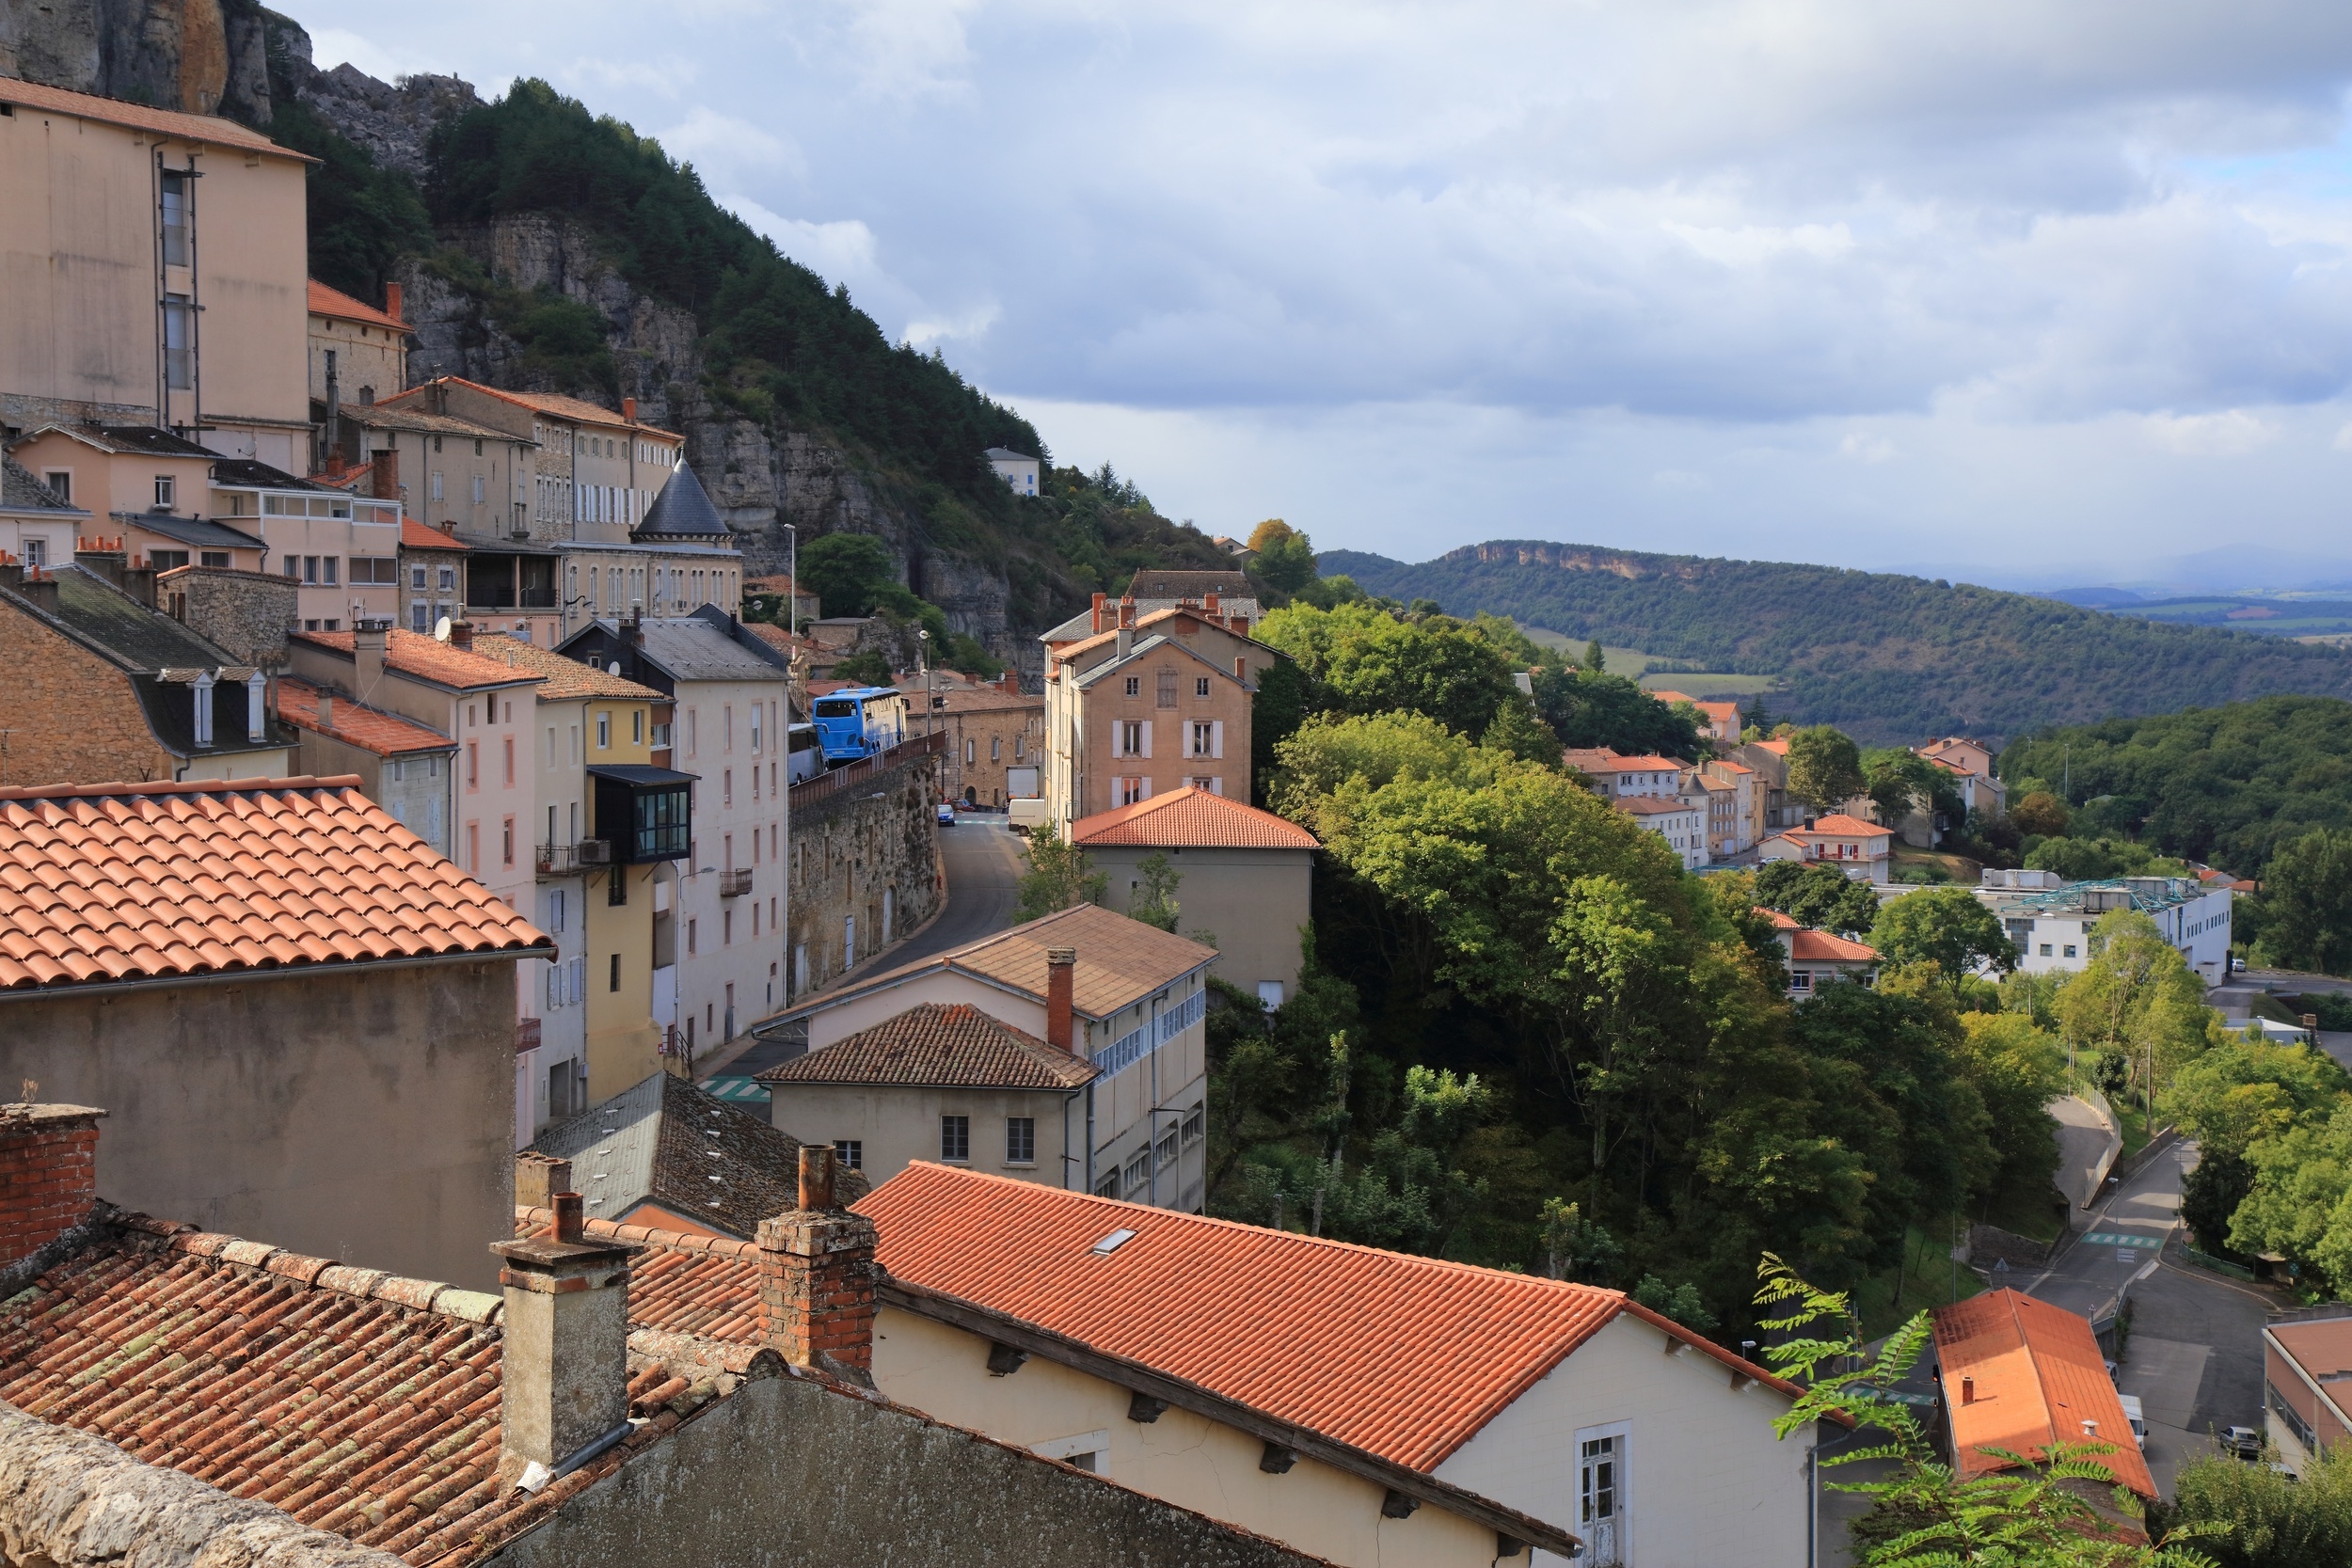 <p>Roquefort-sur-Soulzon is another town that lends its name to an internationally-loved cheese. It's the perfect destination if you love that distinct cheese. Located in southwestern France, you’ll always have decent weather. And you’re in the heart of the mountains, should you fancy a hike.</p><p><a href='https://www.msn.com/en-us/community/channel/vid-cj9pqbr0vn9in2b6ddcd8sfgpfq6x6utp44fssrv6mc2gtybw0us'>Follow us on MSN to see more of our exclusive lifestyle content.</a></p>